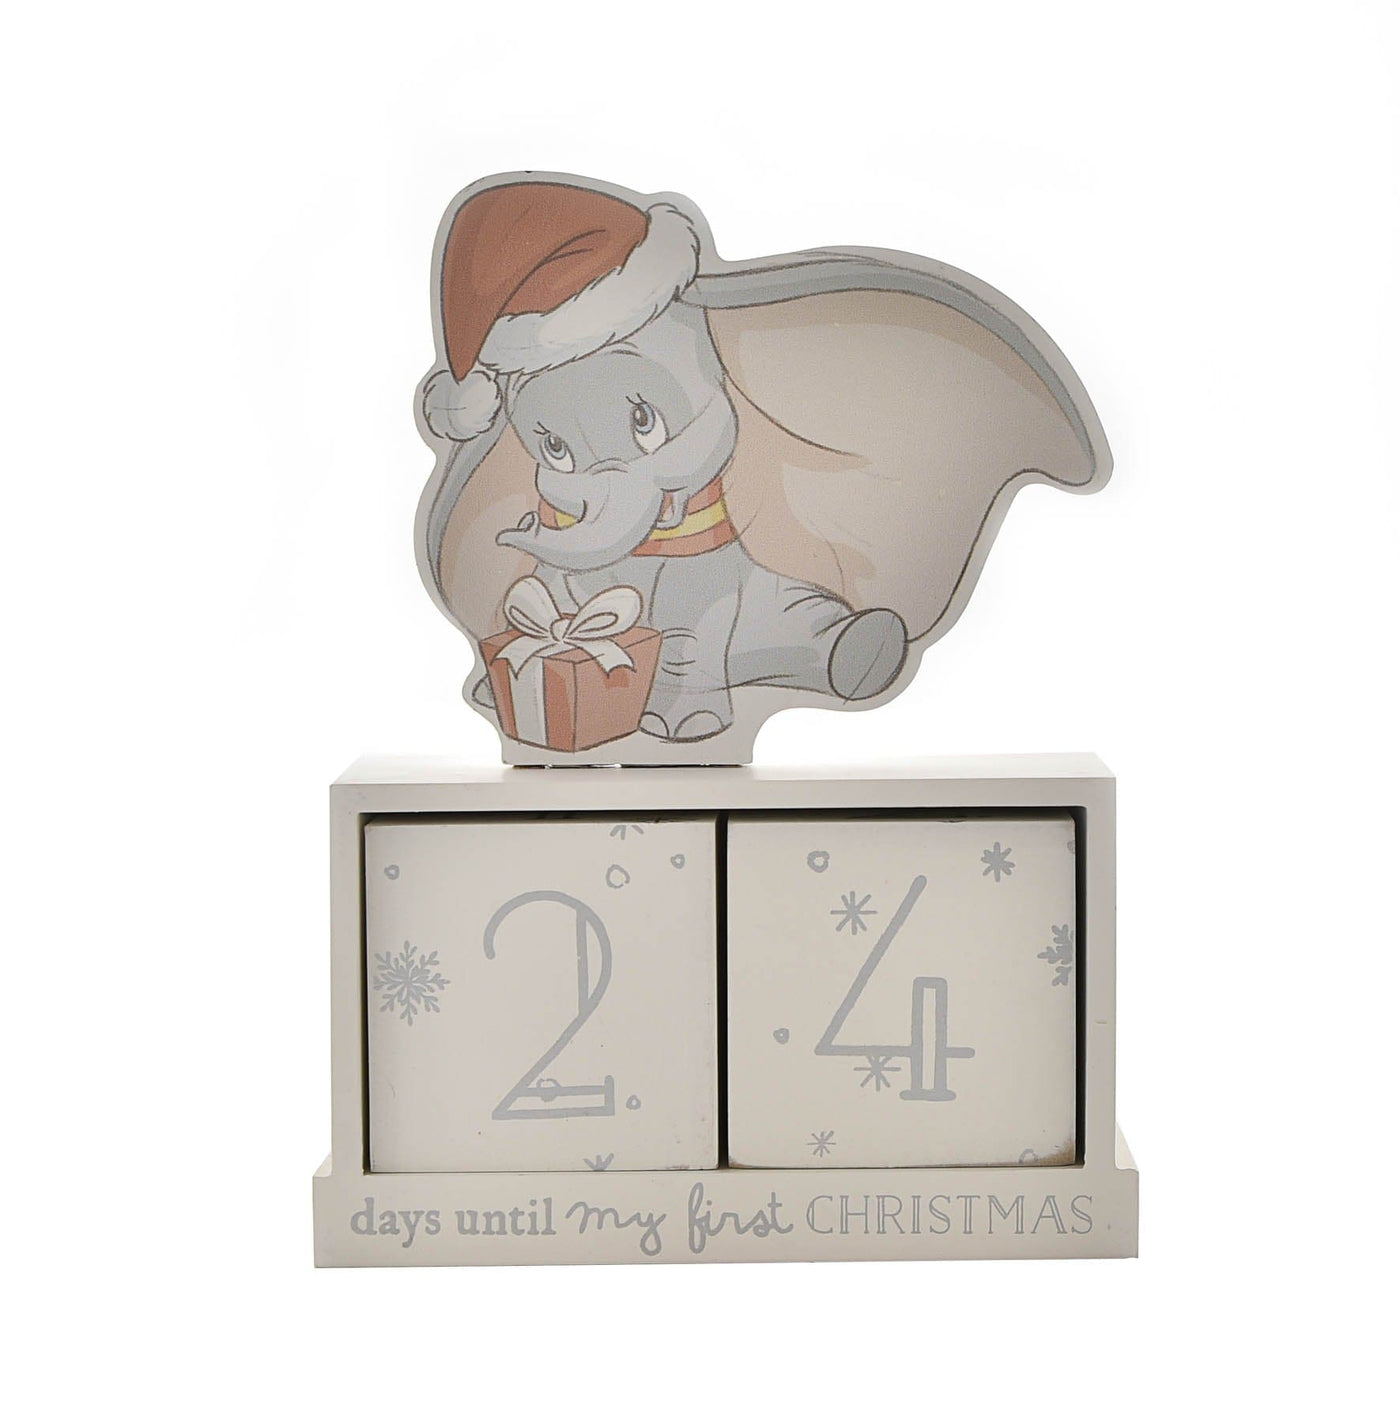 Widdop Gifts Christmas Decorations Dumbo Disney Character My First Christmas Baby's Countdown Block